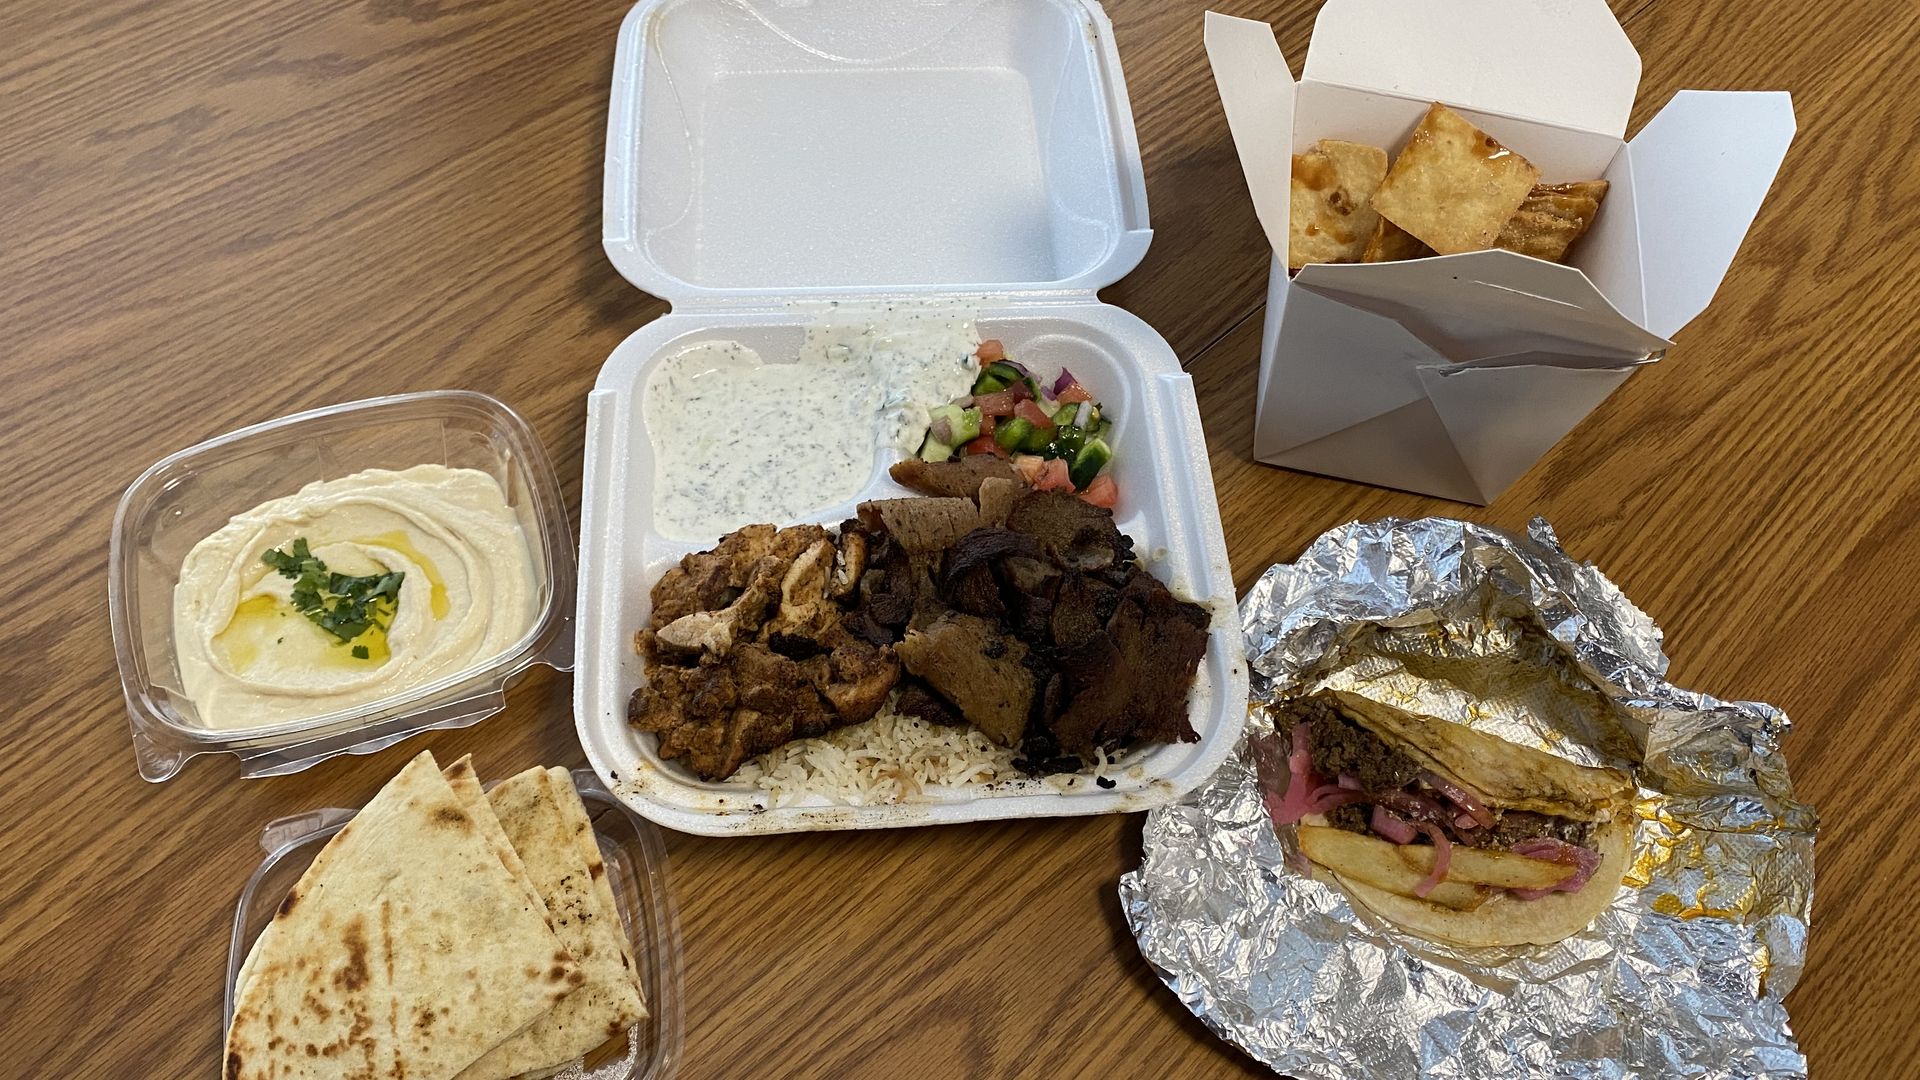 Food in takeout containers on a table from a Mexican Mediterranean fusion food truck